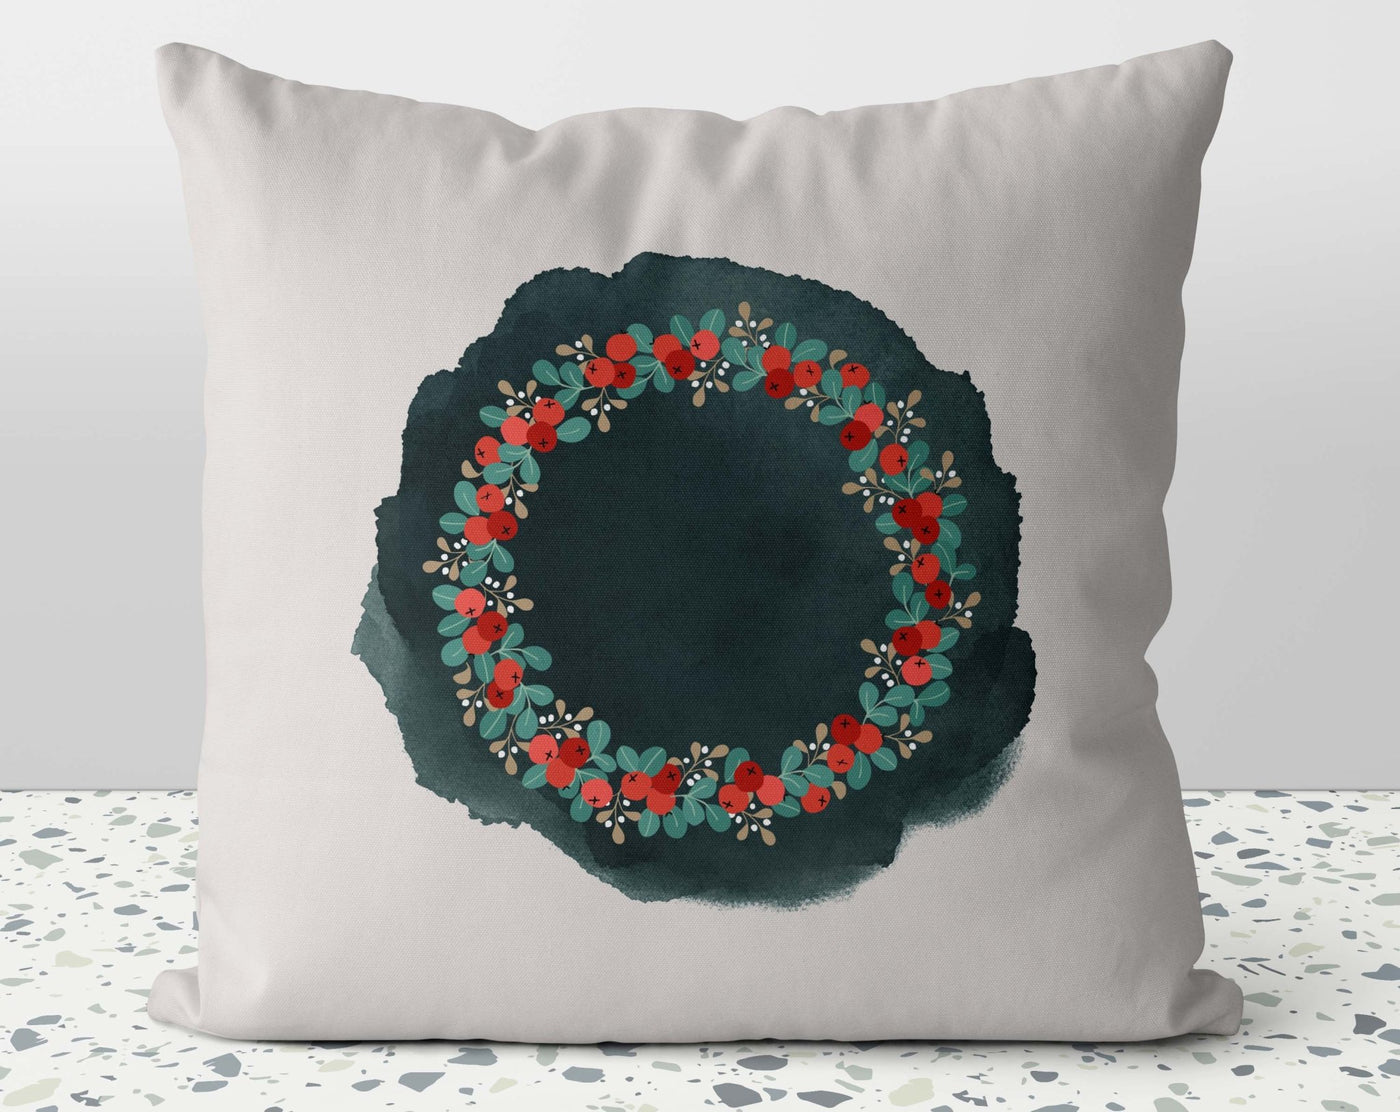 Christmas Ornaments Pillow Throw Cover with Insert - Cush Potato Pillows